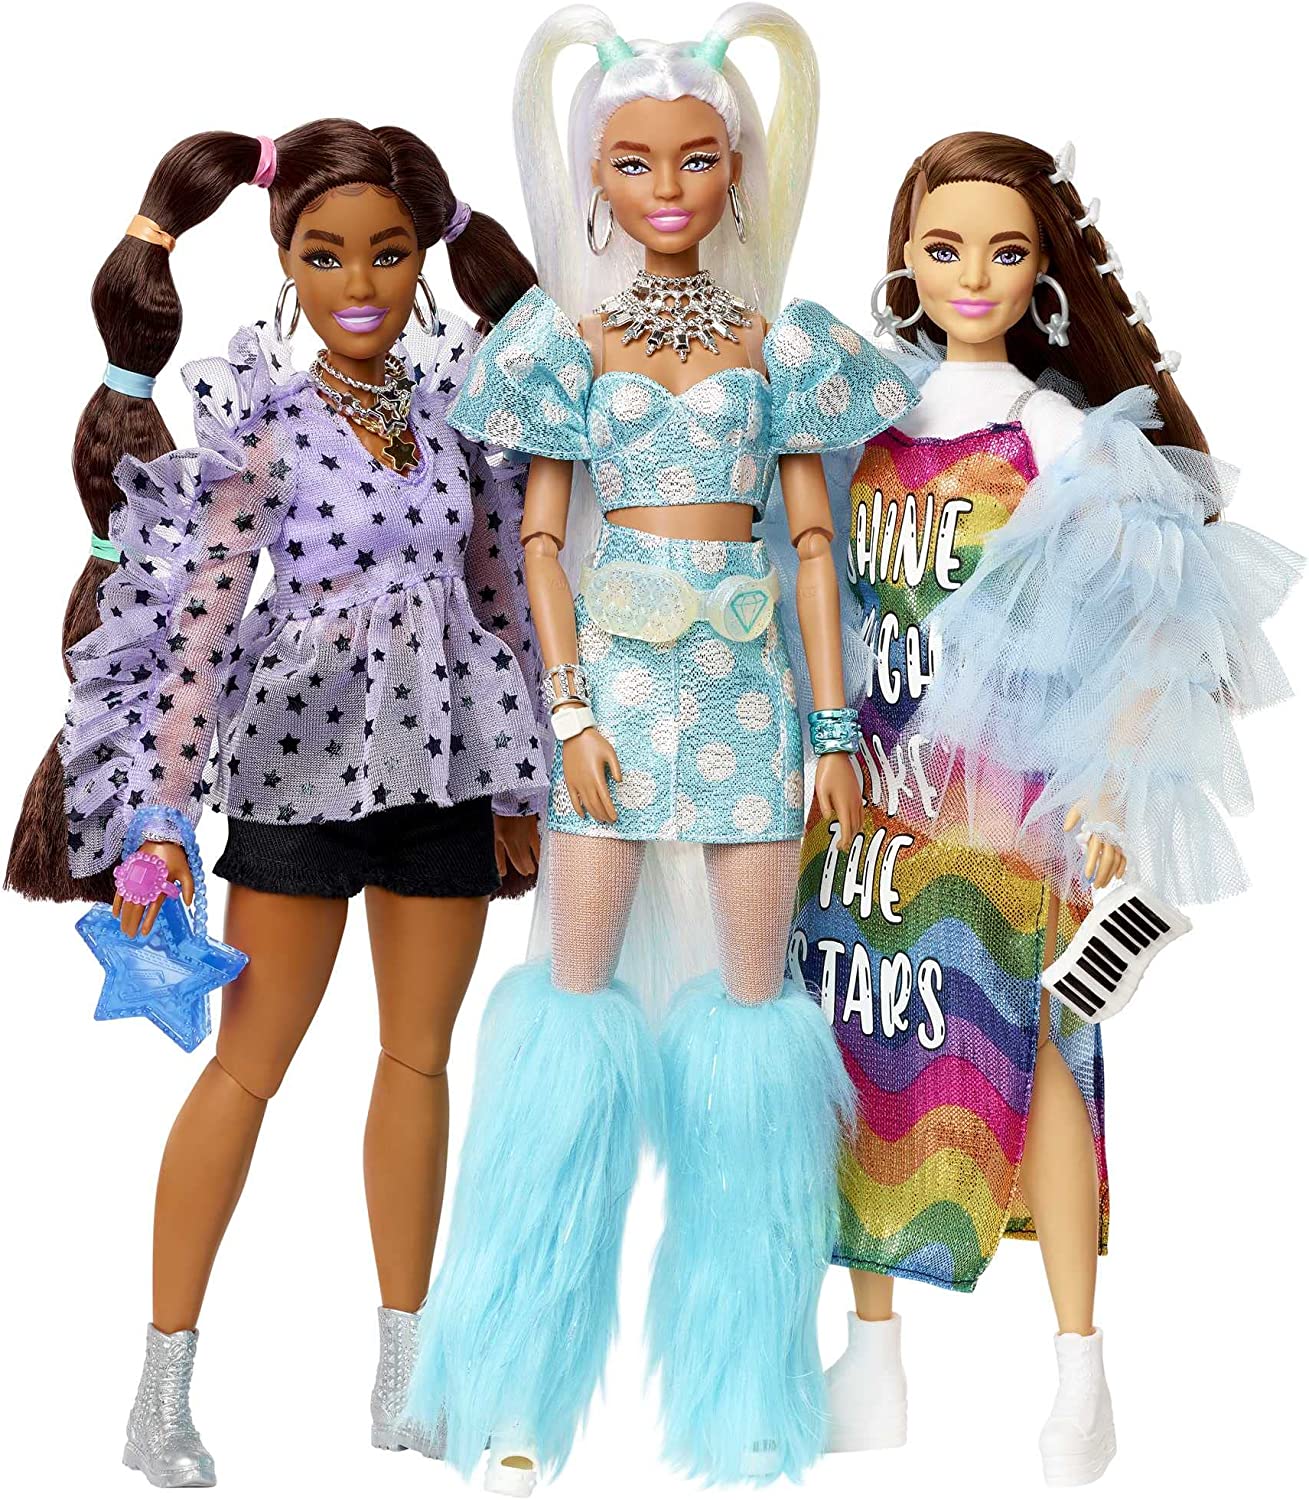 Barbie Extra 5 pack doll set with new exclusive Barbie Extra doll 2022 